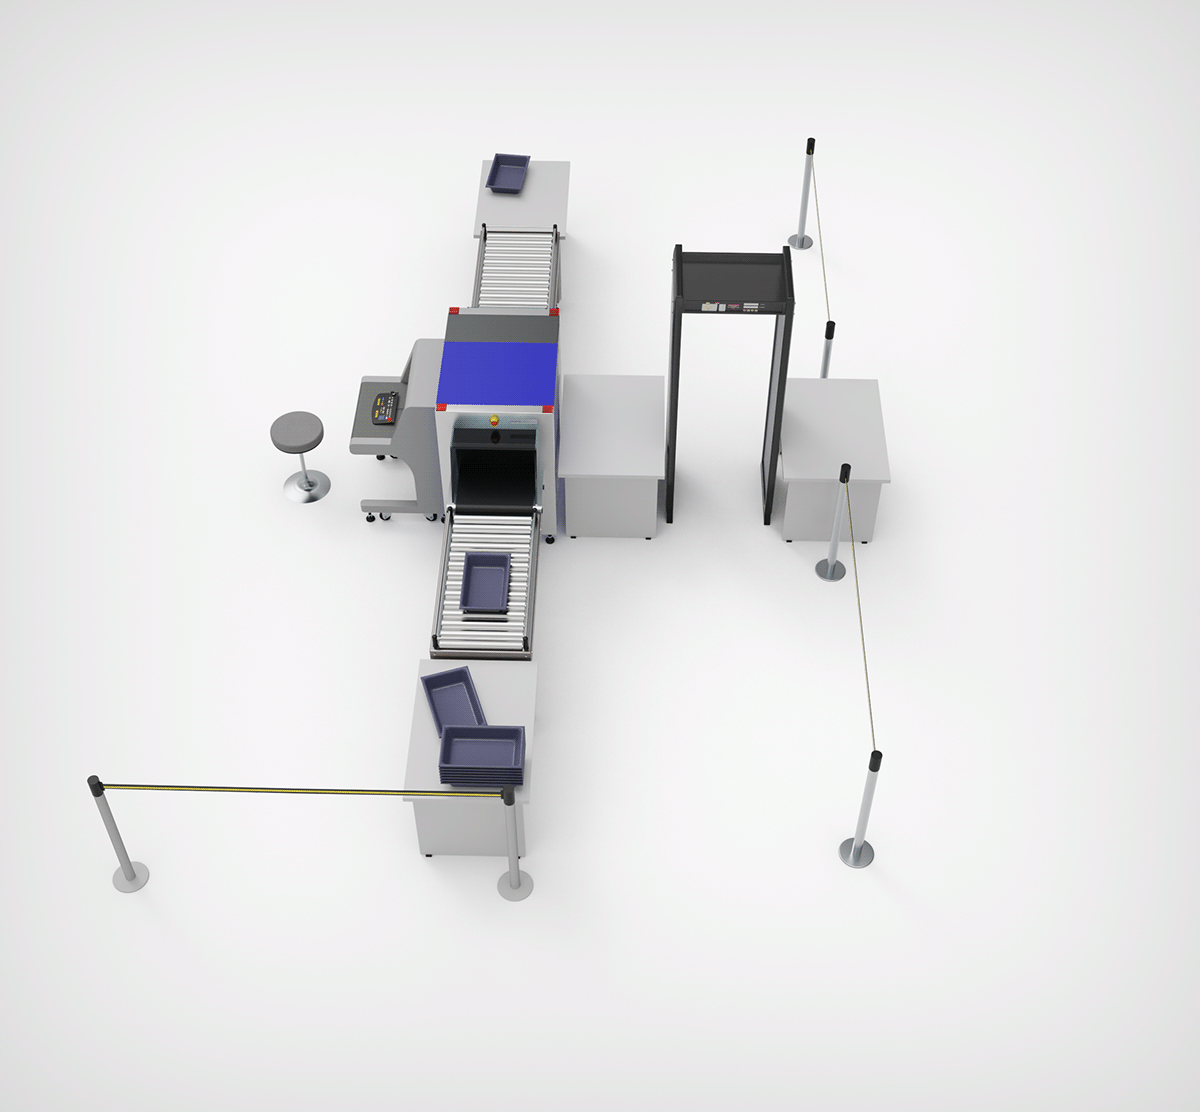 blender keyshot x-ray baggage xray 3D airport security Technical Design introscope